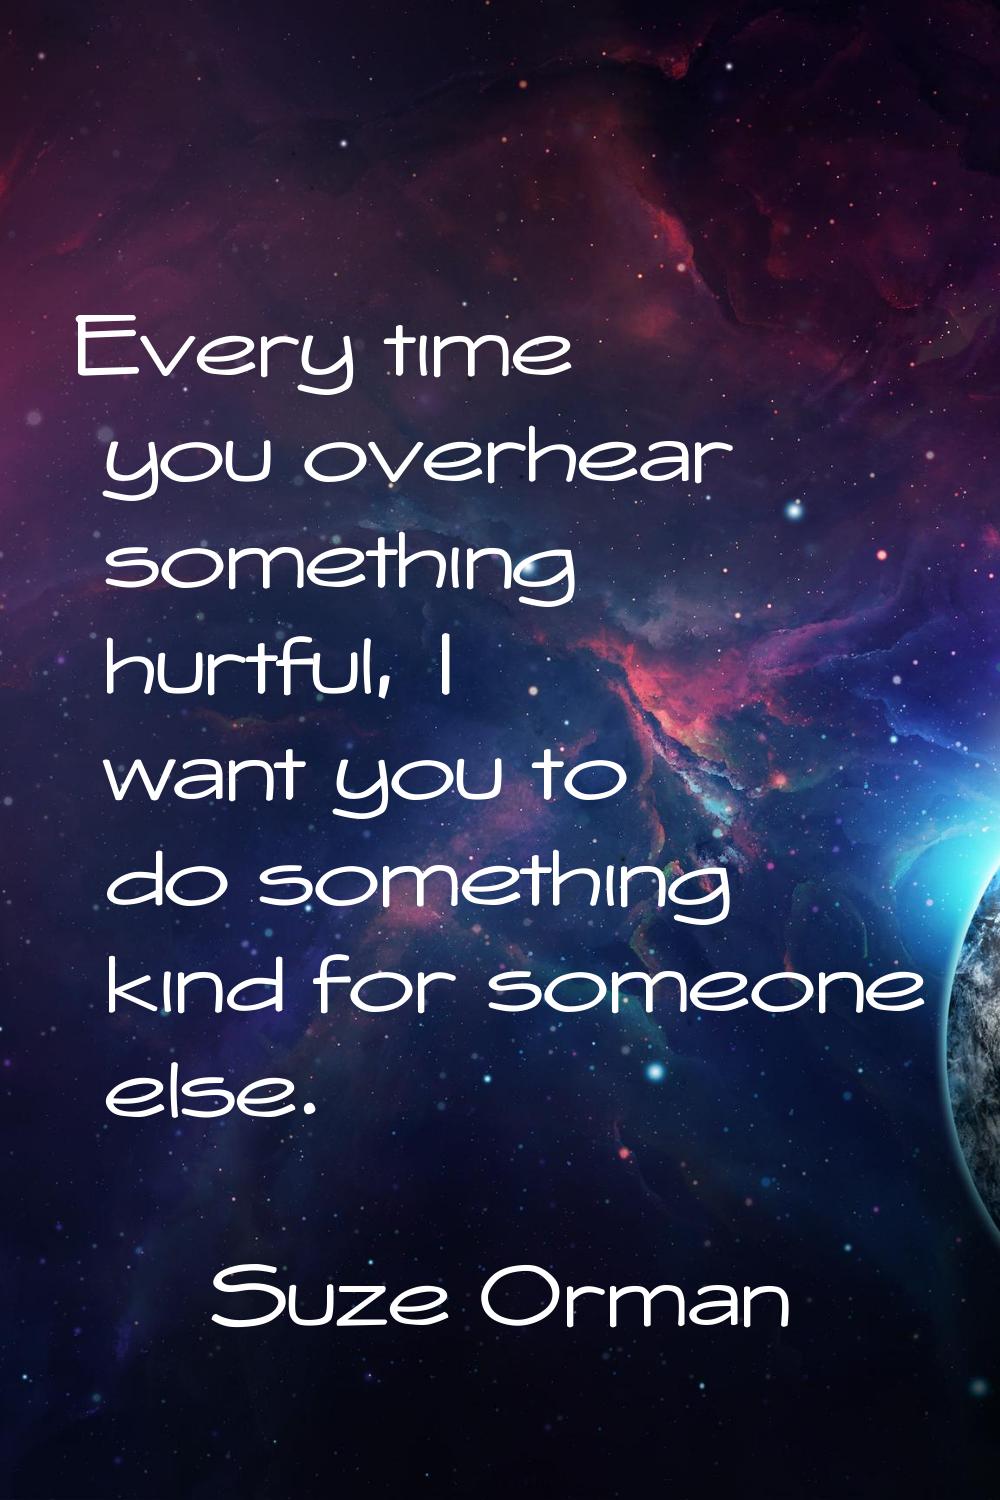 Every time you overhear something hurtful, I want you to do something kind for someone else.